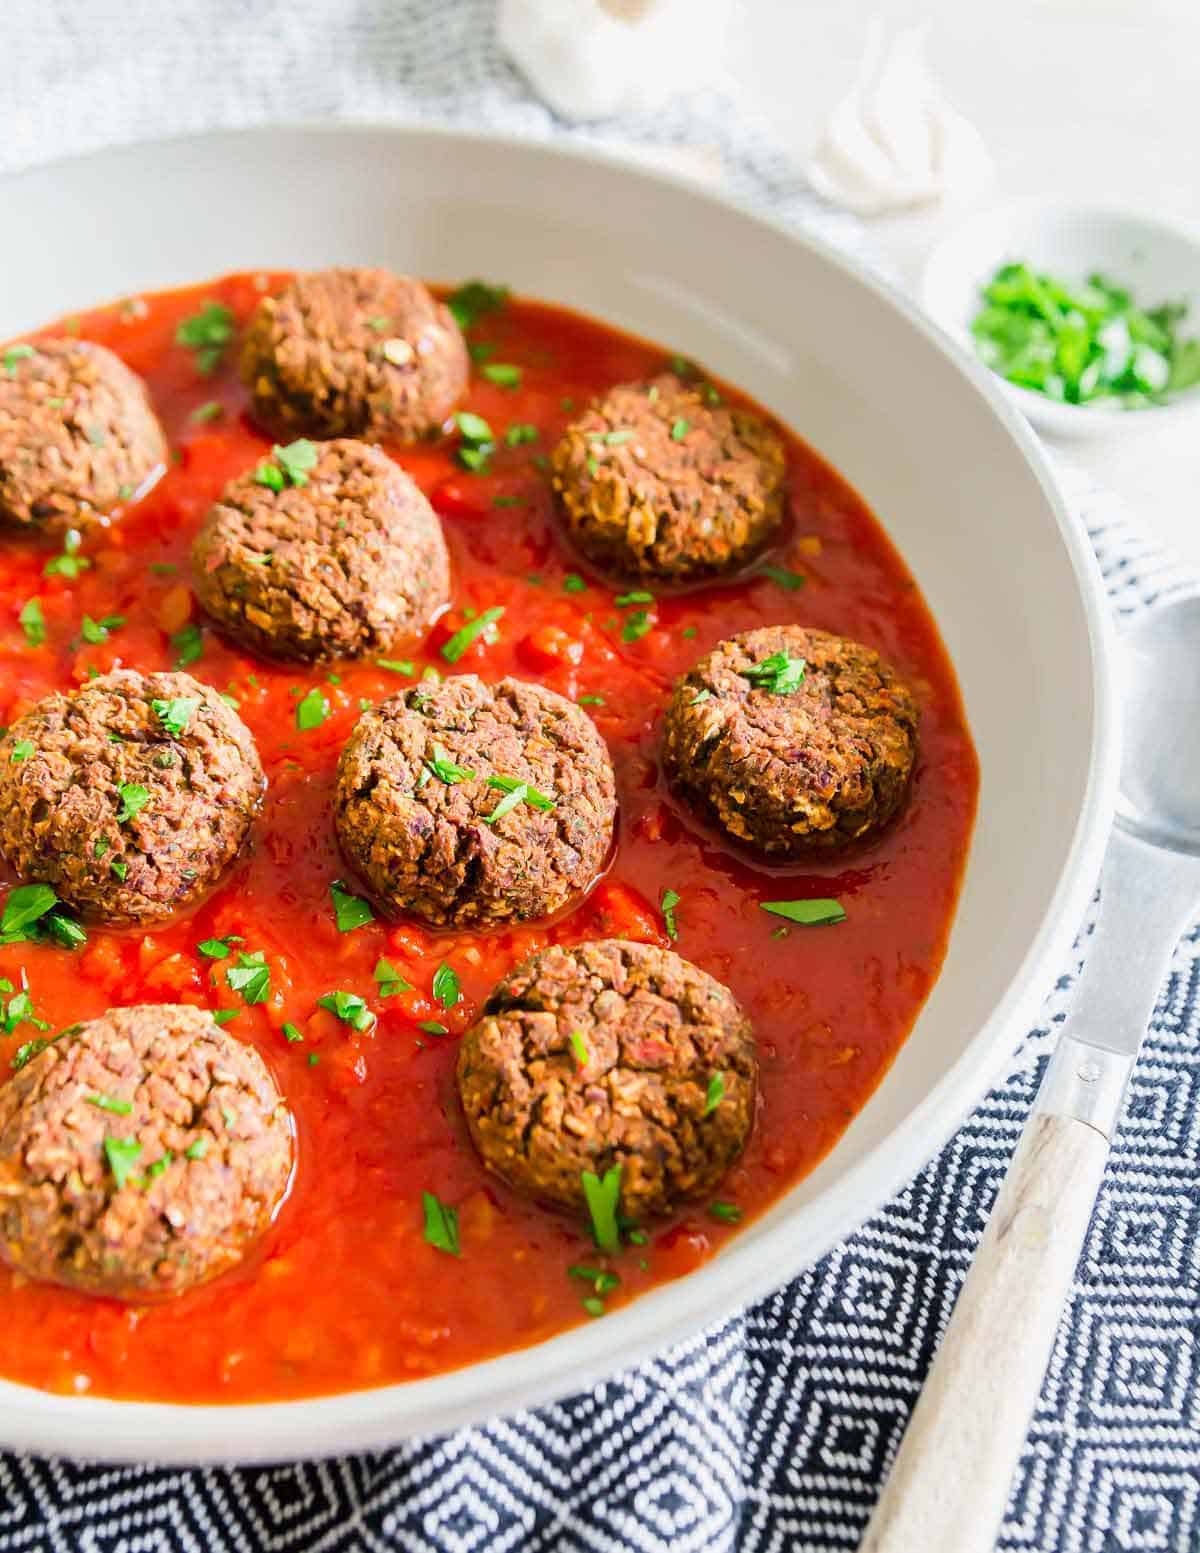 Looking for a vegan way to enjoy meatballs? Try these easy gluten-free, vegan black bean "meatballs" over pasta with your favorite tomato sauce. / Looking for a vegan way to enjoy meatballs? Try these easy gluten-free, vegan black bean "meatballs" over pasta with your favorite tomato sauce.
